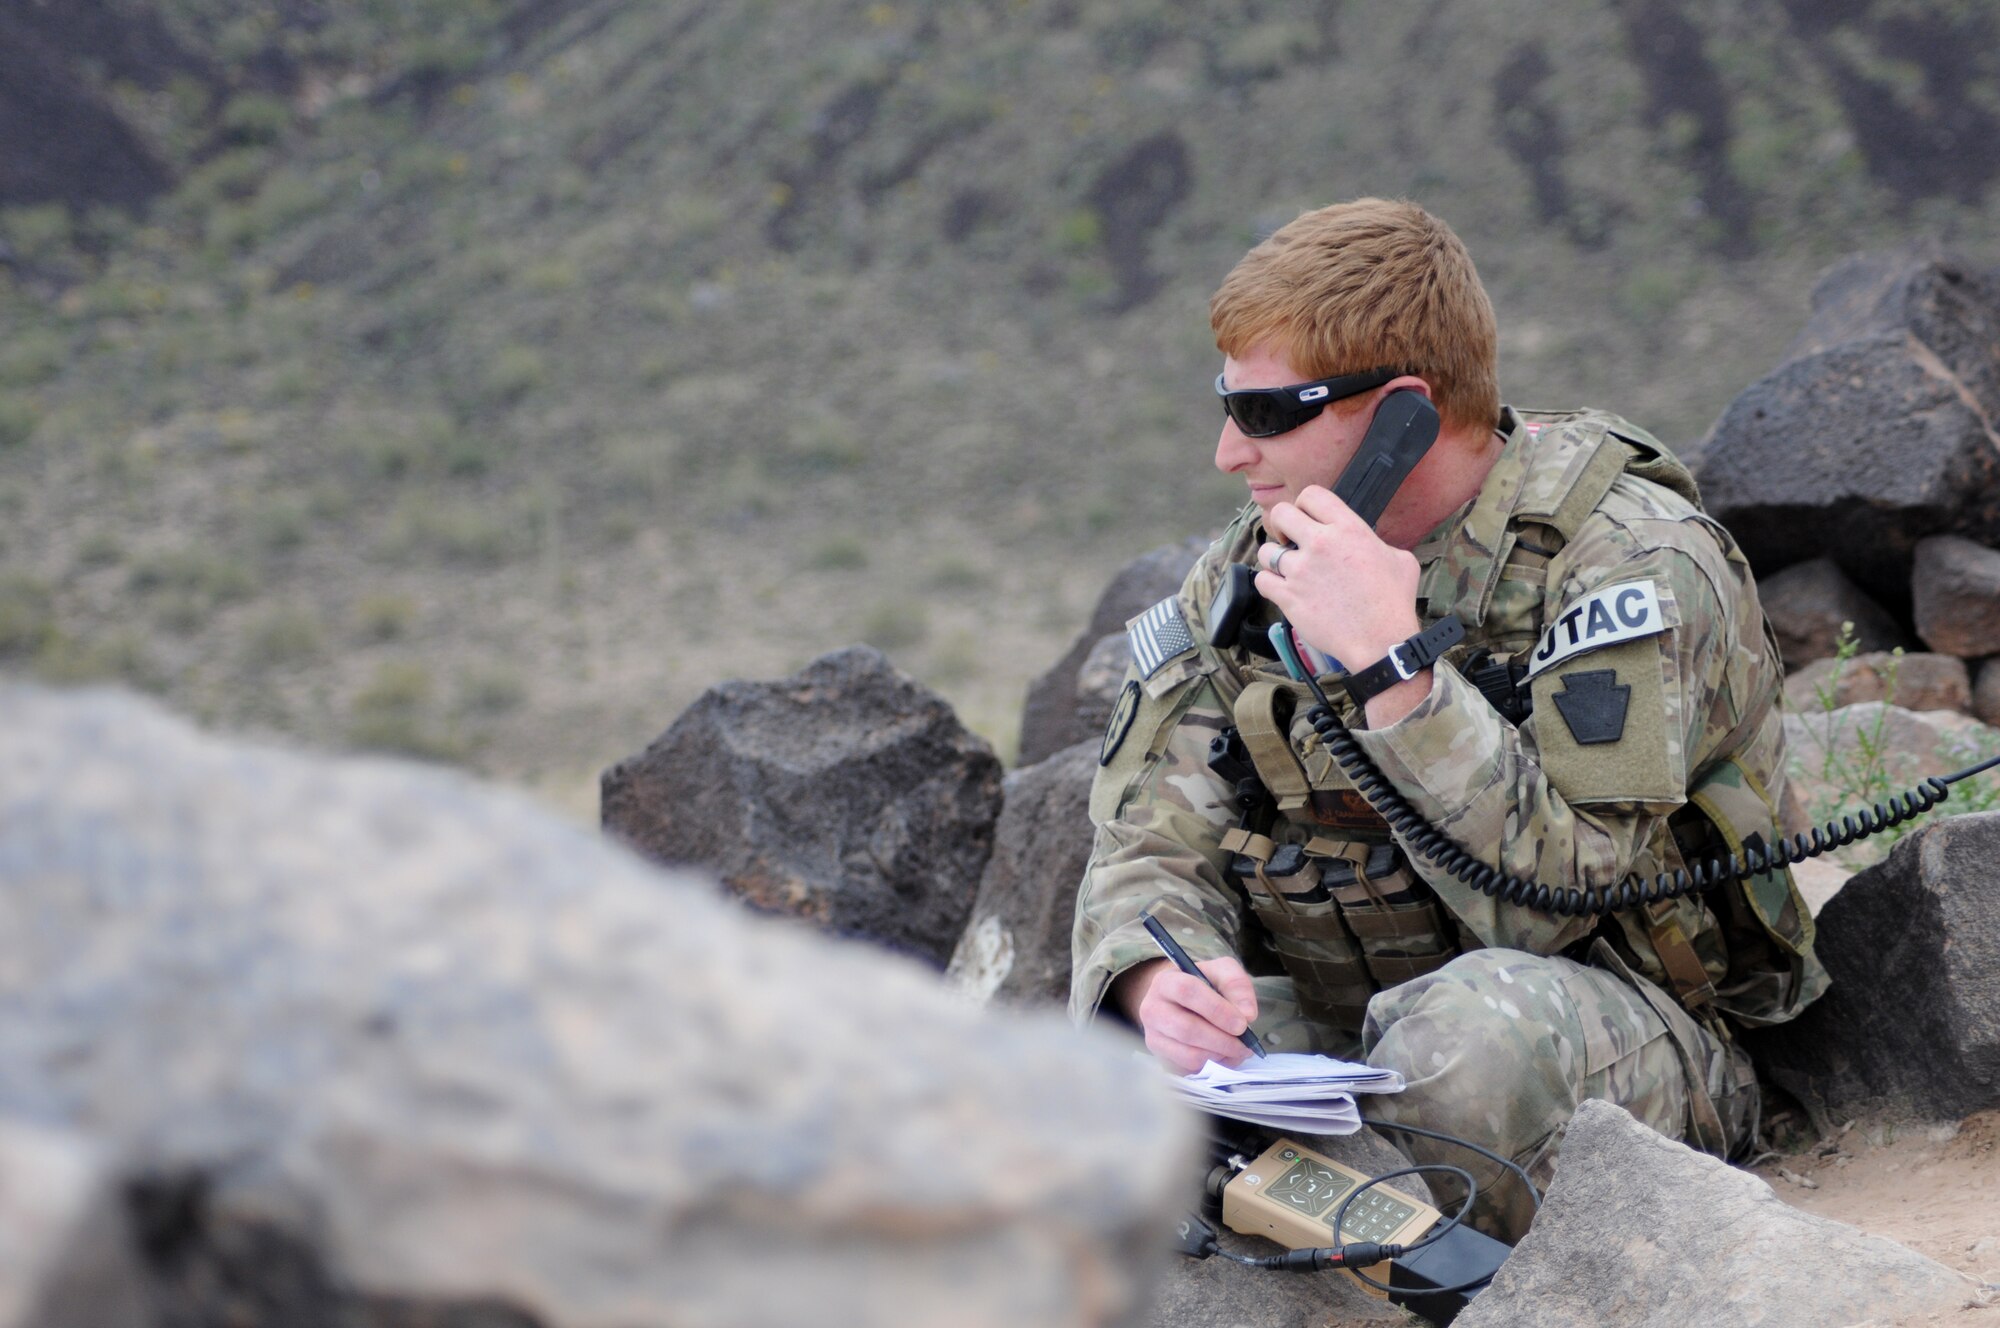 A picture of U.S. Air Force 2nd Lt. Keith A. Giamberardino, an air liaison officer, using a radio.